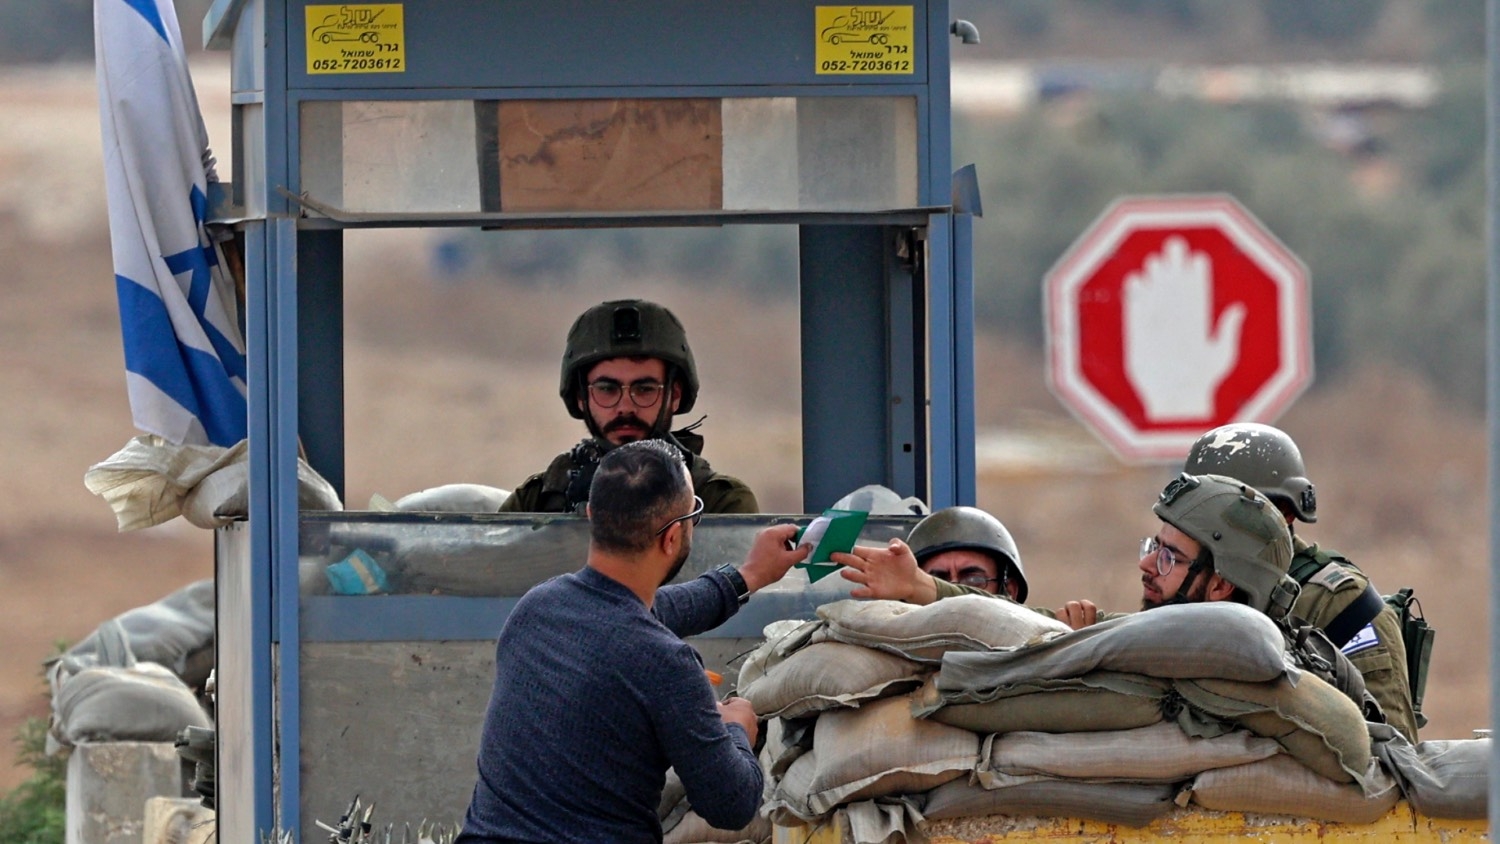 A Palestinian hands his documents to an Israeli soldier manning a checkpoint in the occupied West Bank on 26 October 2022.